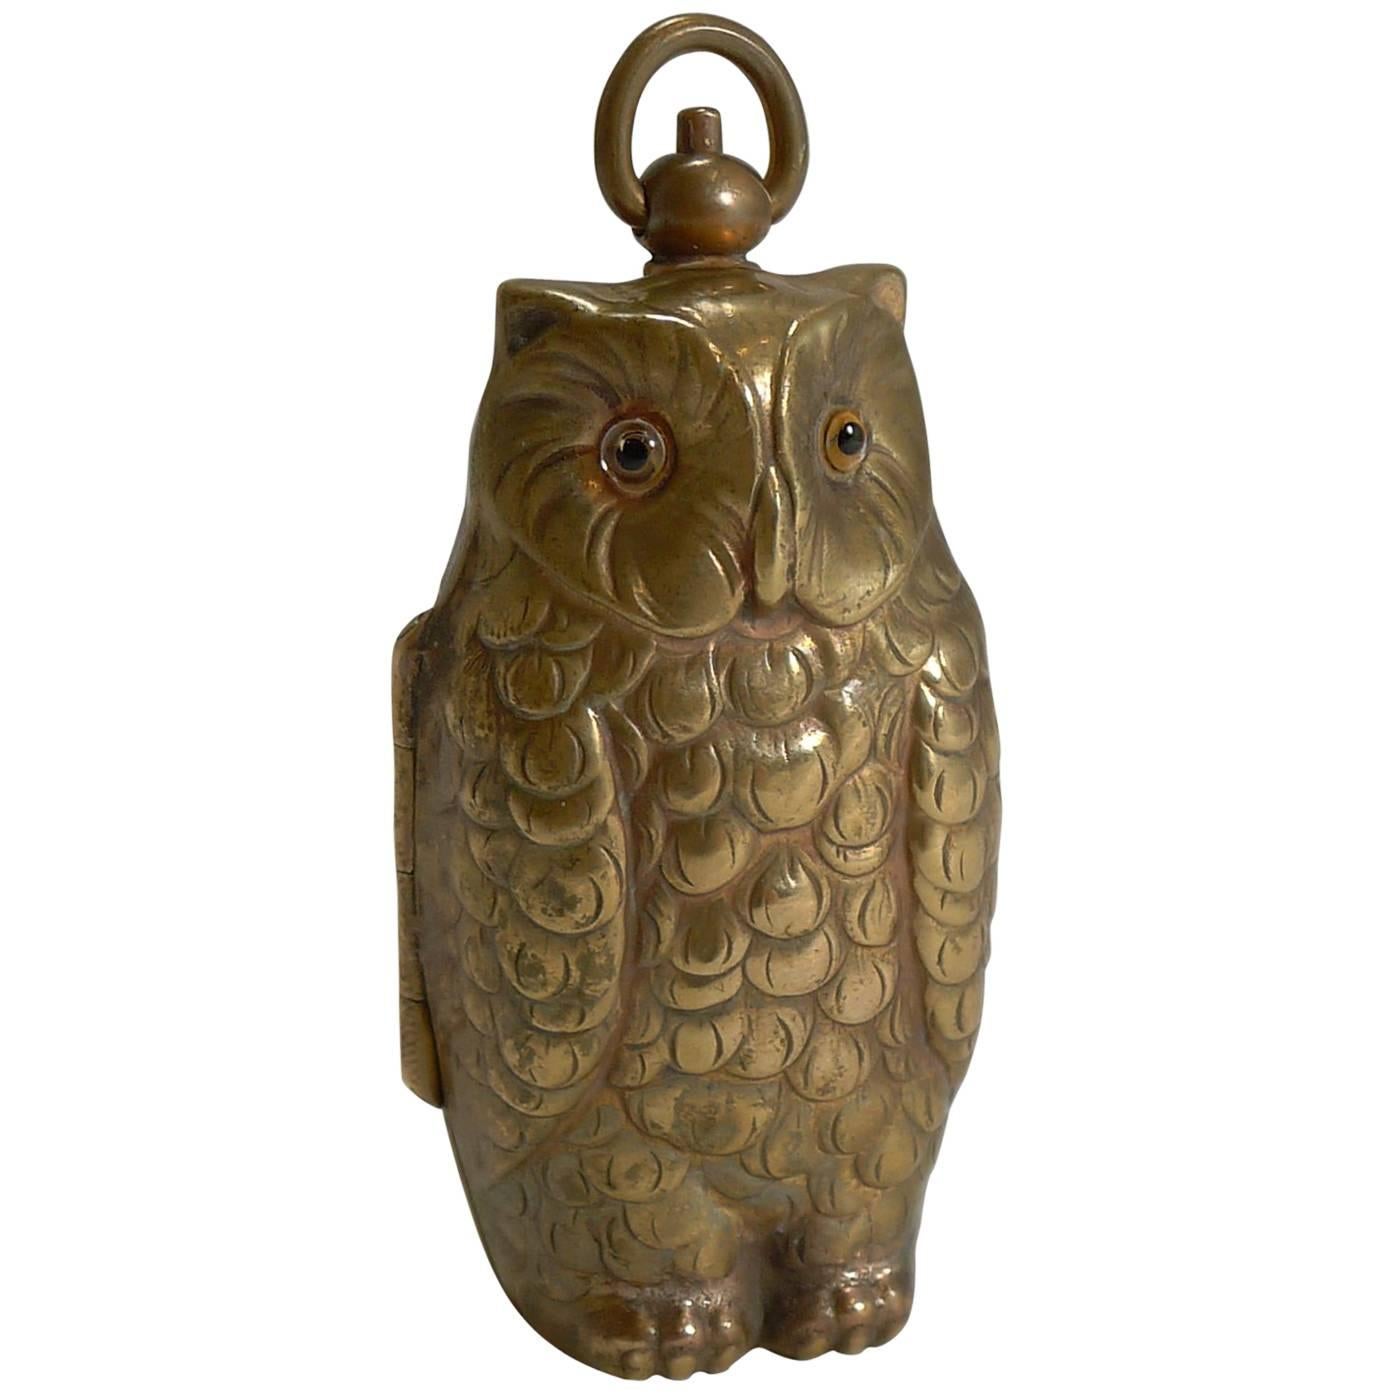 Antique English Figural Sovereign Case, Owl with Glass Eyes